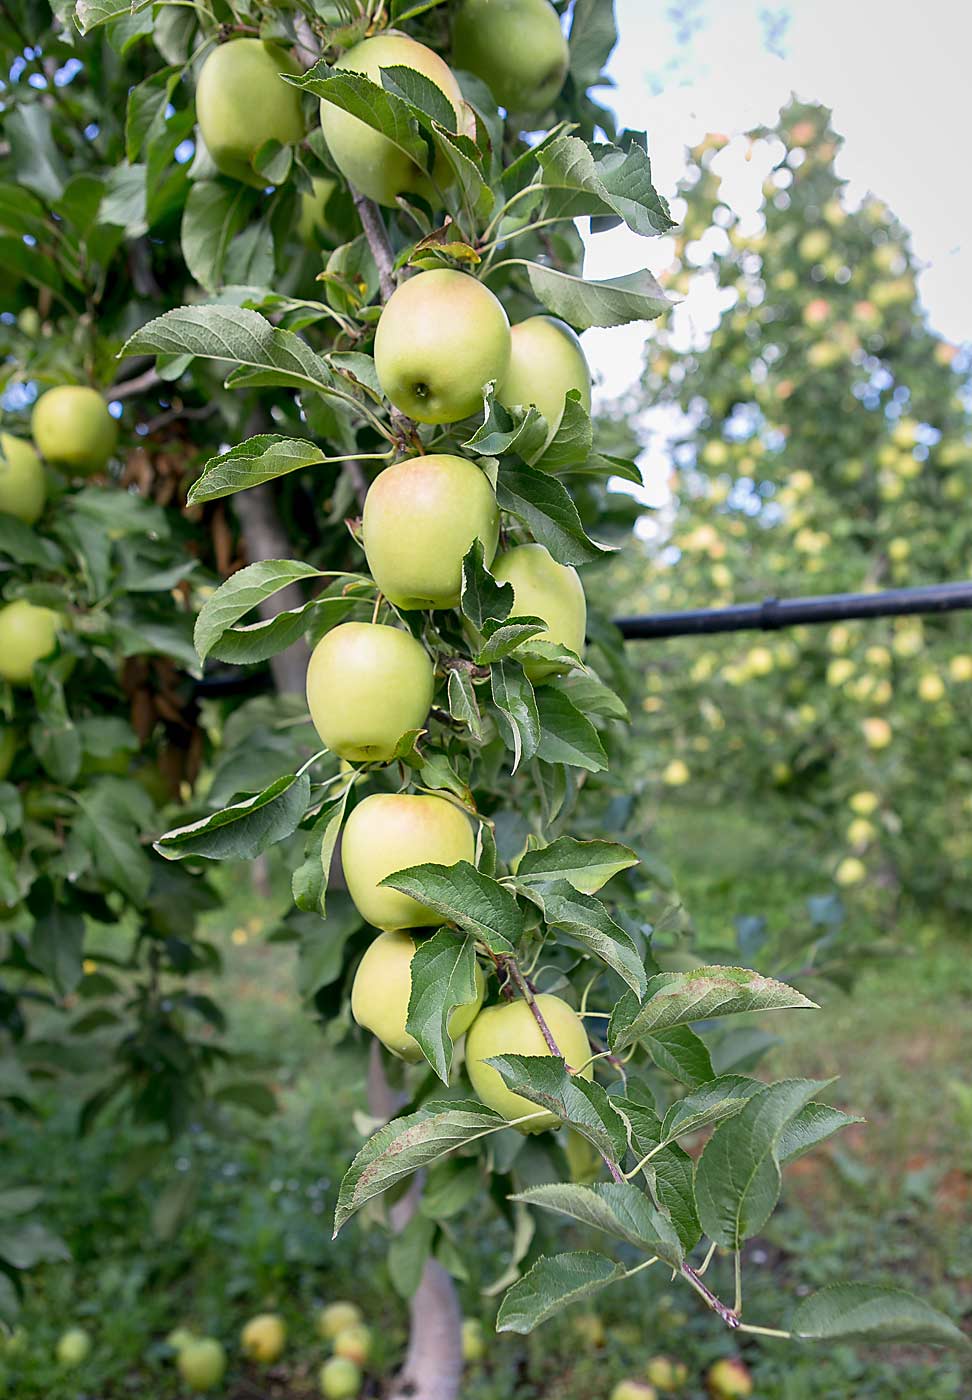 The cultivar PremA153, marketed as Lemonade, nears harvest in New Zealand. Washington orchards are also planting the cultivar, as North America license-holder Giumarra Cos. marketed the first commercial crop this past winter. (Courtesy Giumarra Cos.)